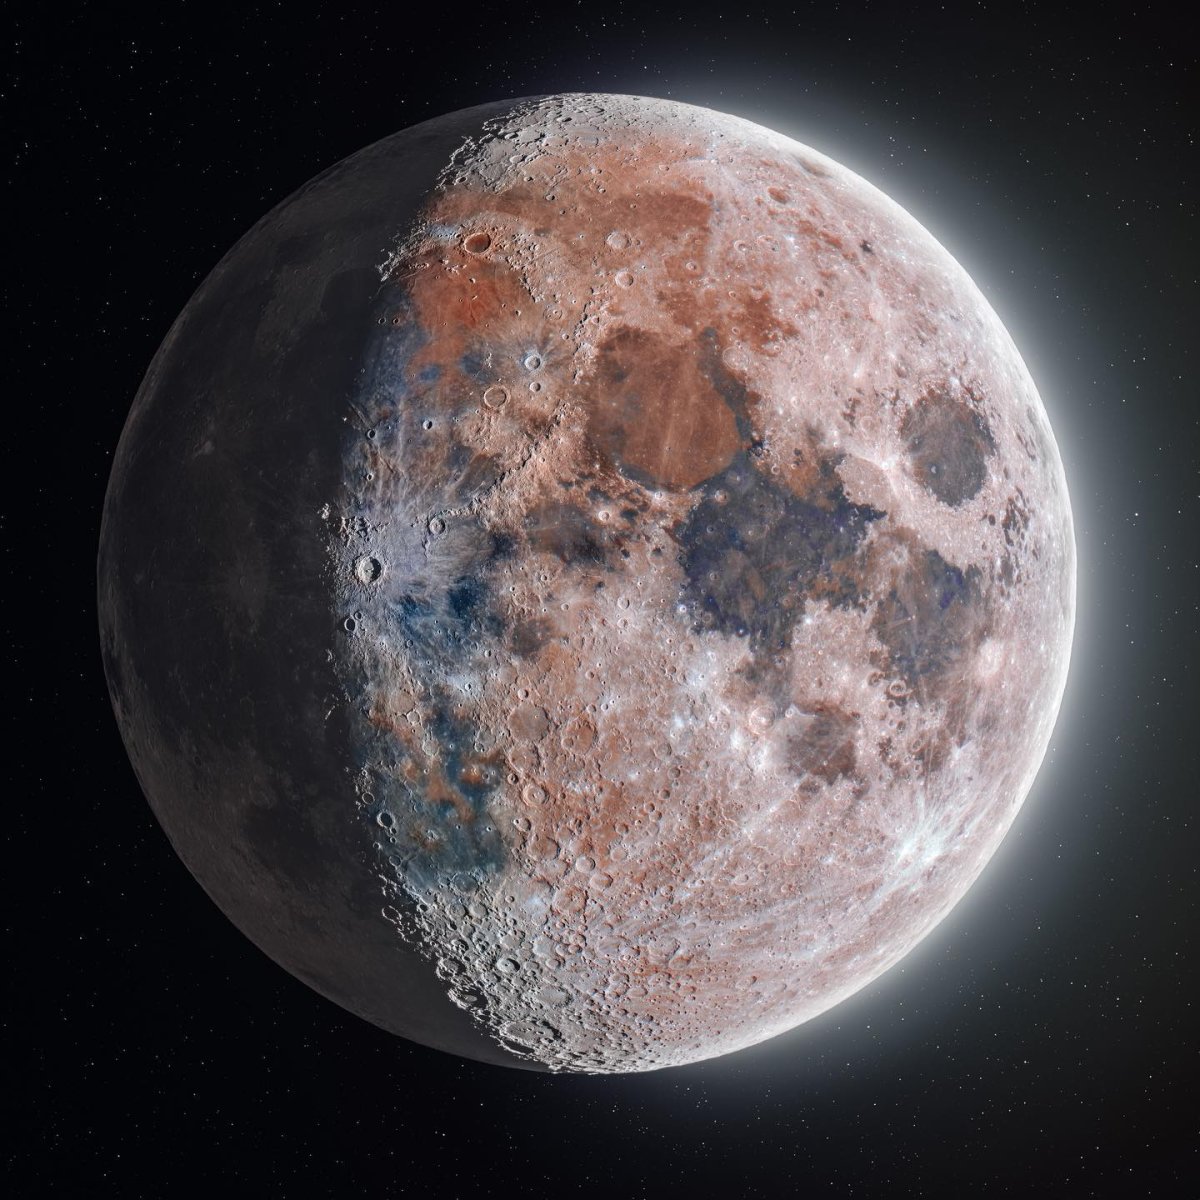 New highly detailed photos of the moon taken #1